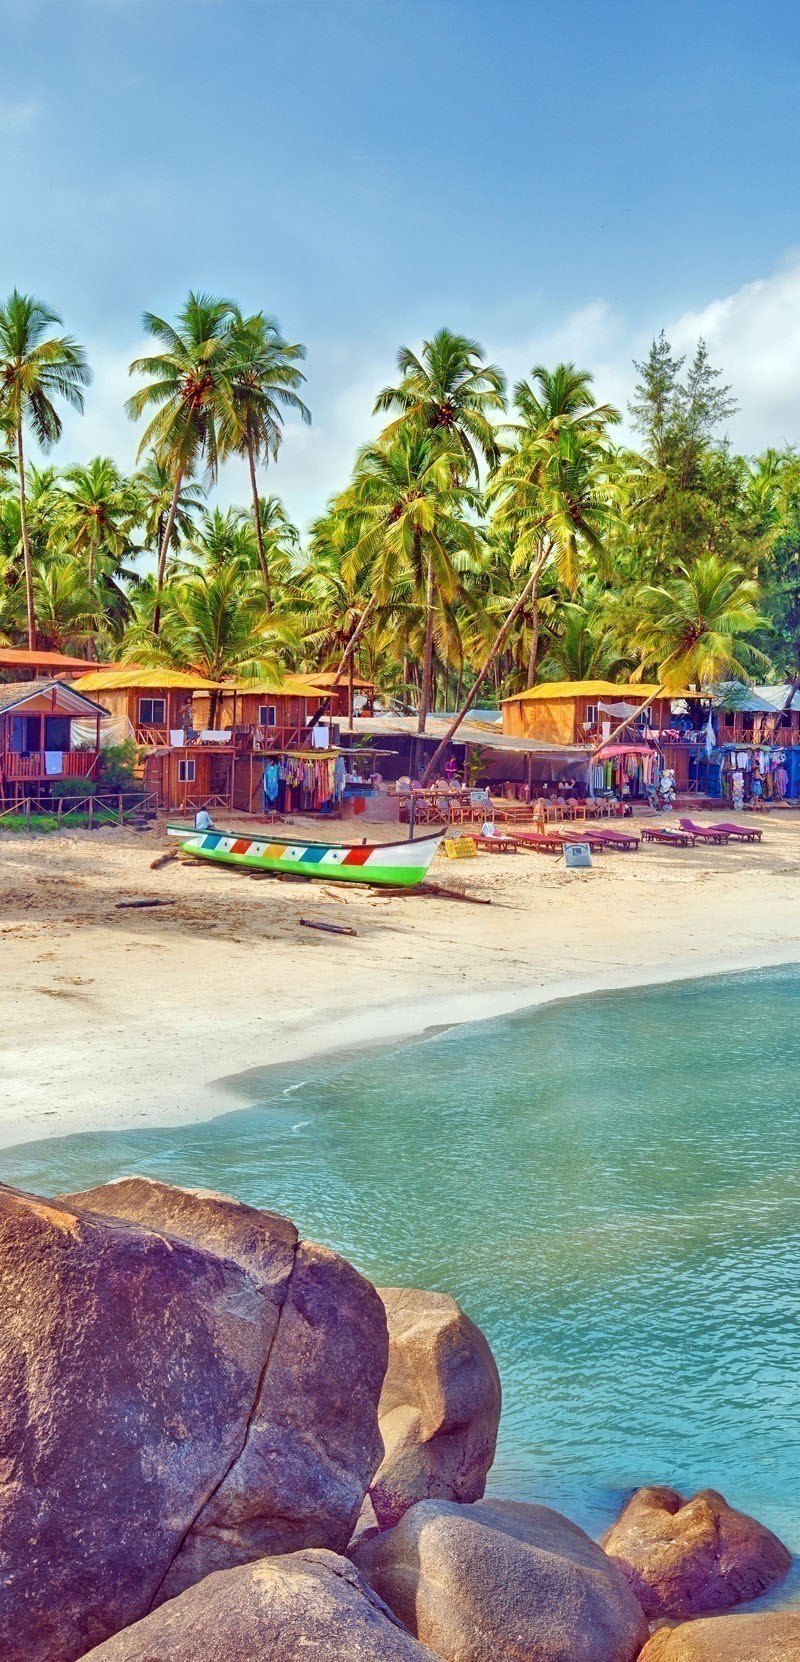 Beautiful Goa province beach in India | Your Complete Travel Guide to India